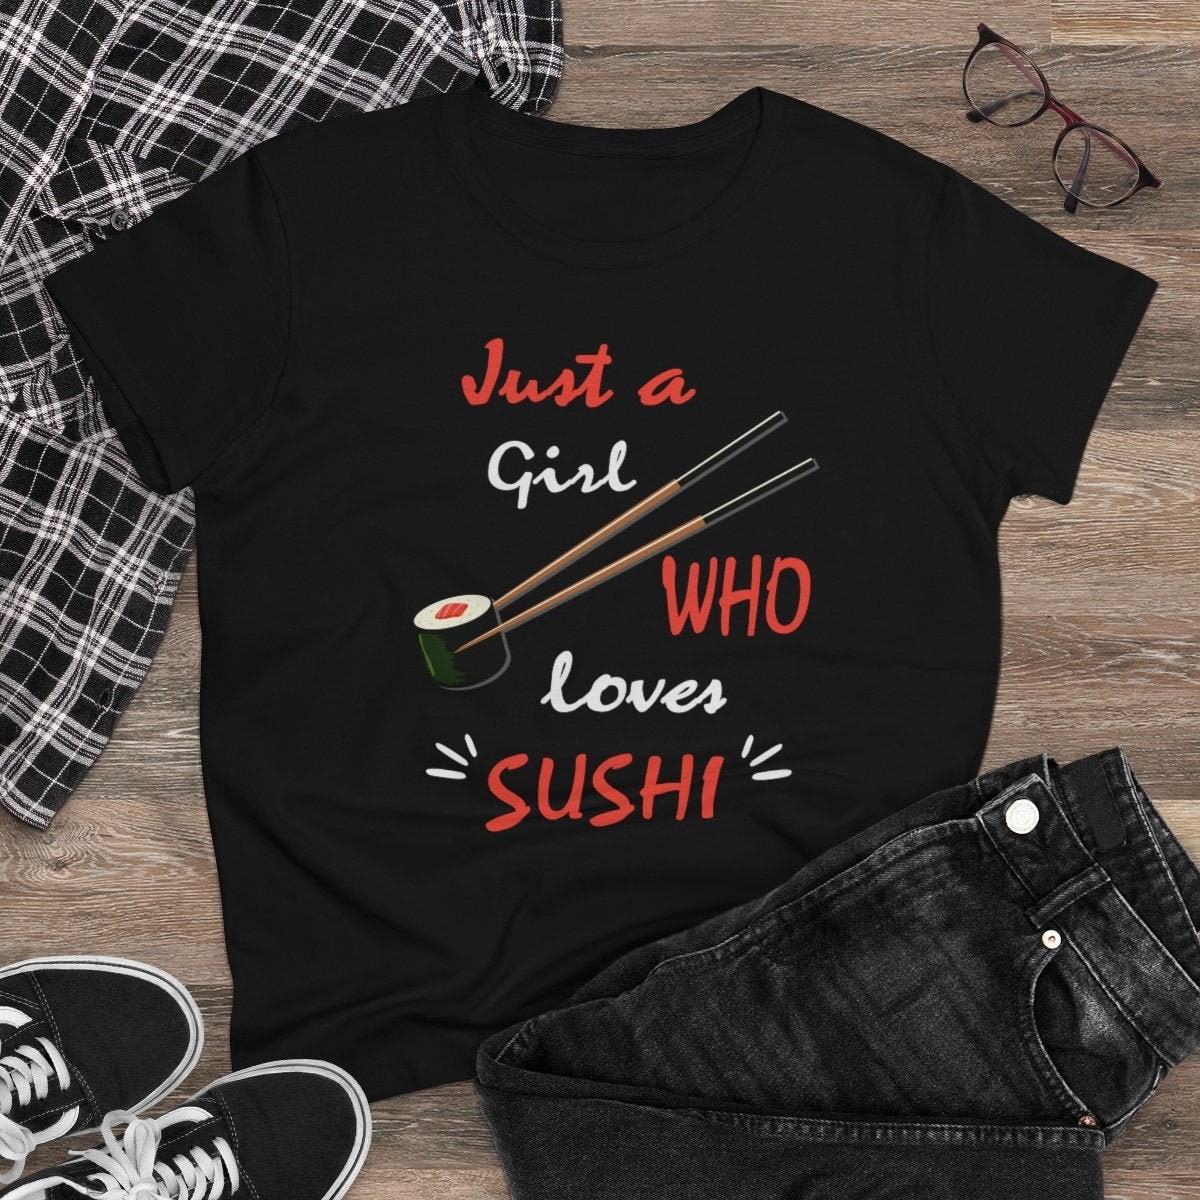 Just A Girl Who Loves Sushi Shirt, Lover T-Shirt, Japanese Food Lover Gift, Seafood, Rolls, Wasabi Sashimi Women's Tee